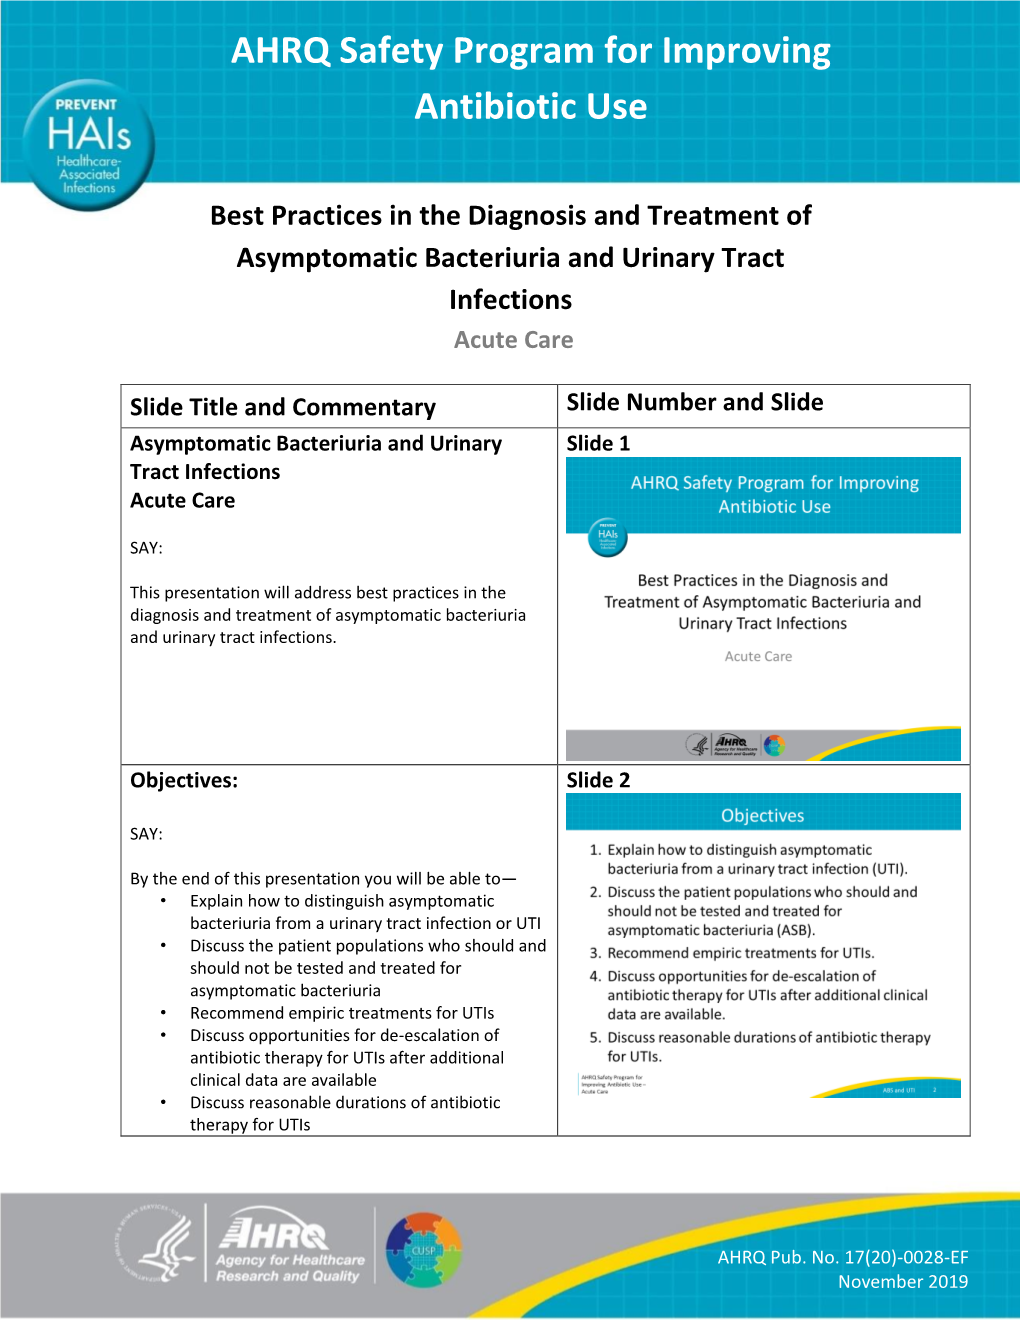 Best Practices in the Diagnosis and Treatment of Asymptomatic